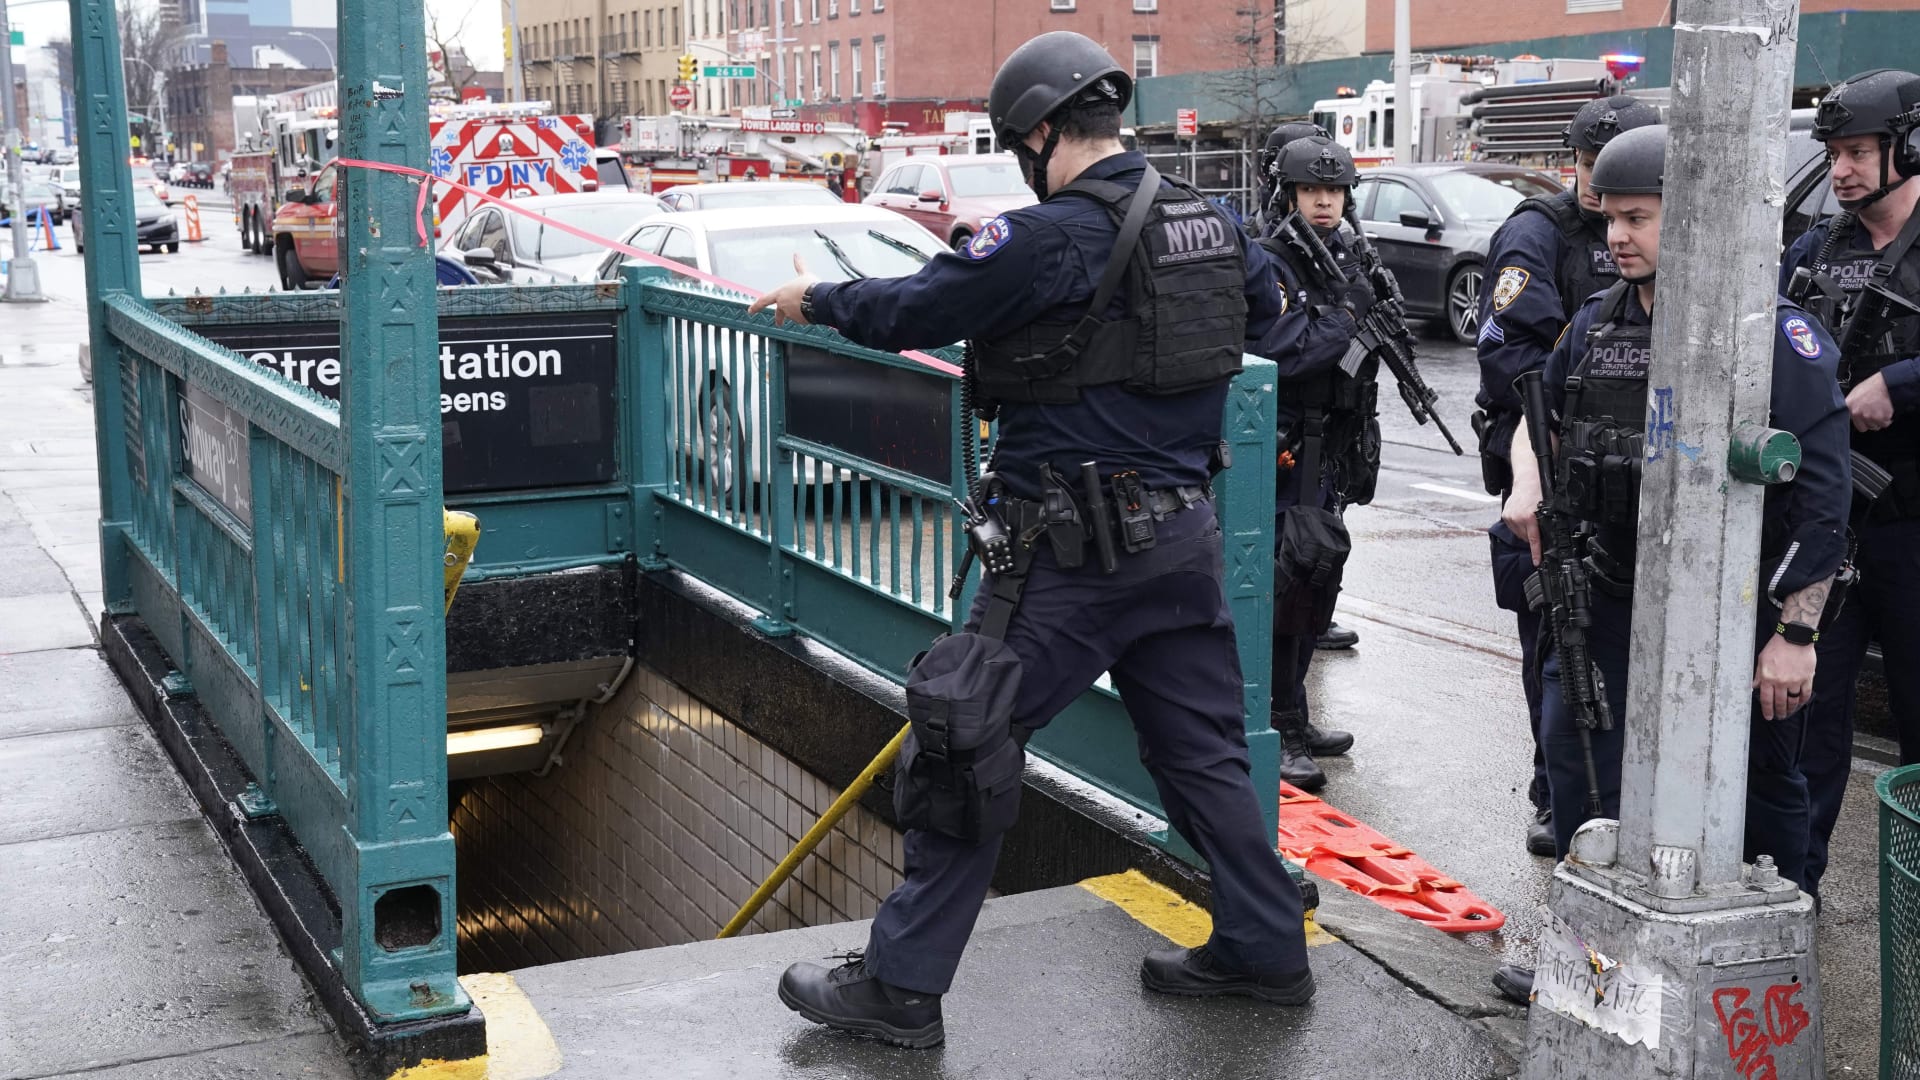 Members of the New York Police Department and emergency vehicles crowd the streets near a subway station in New York City on April 12, 2022, after at least 16 people were injured during a rush-hour shooting in Brooklyn.